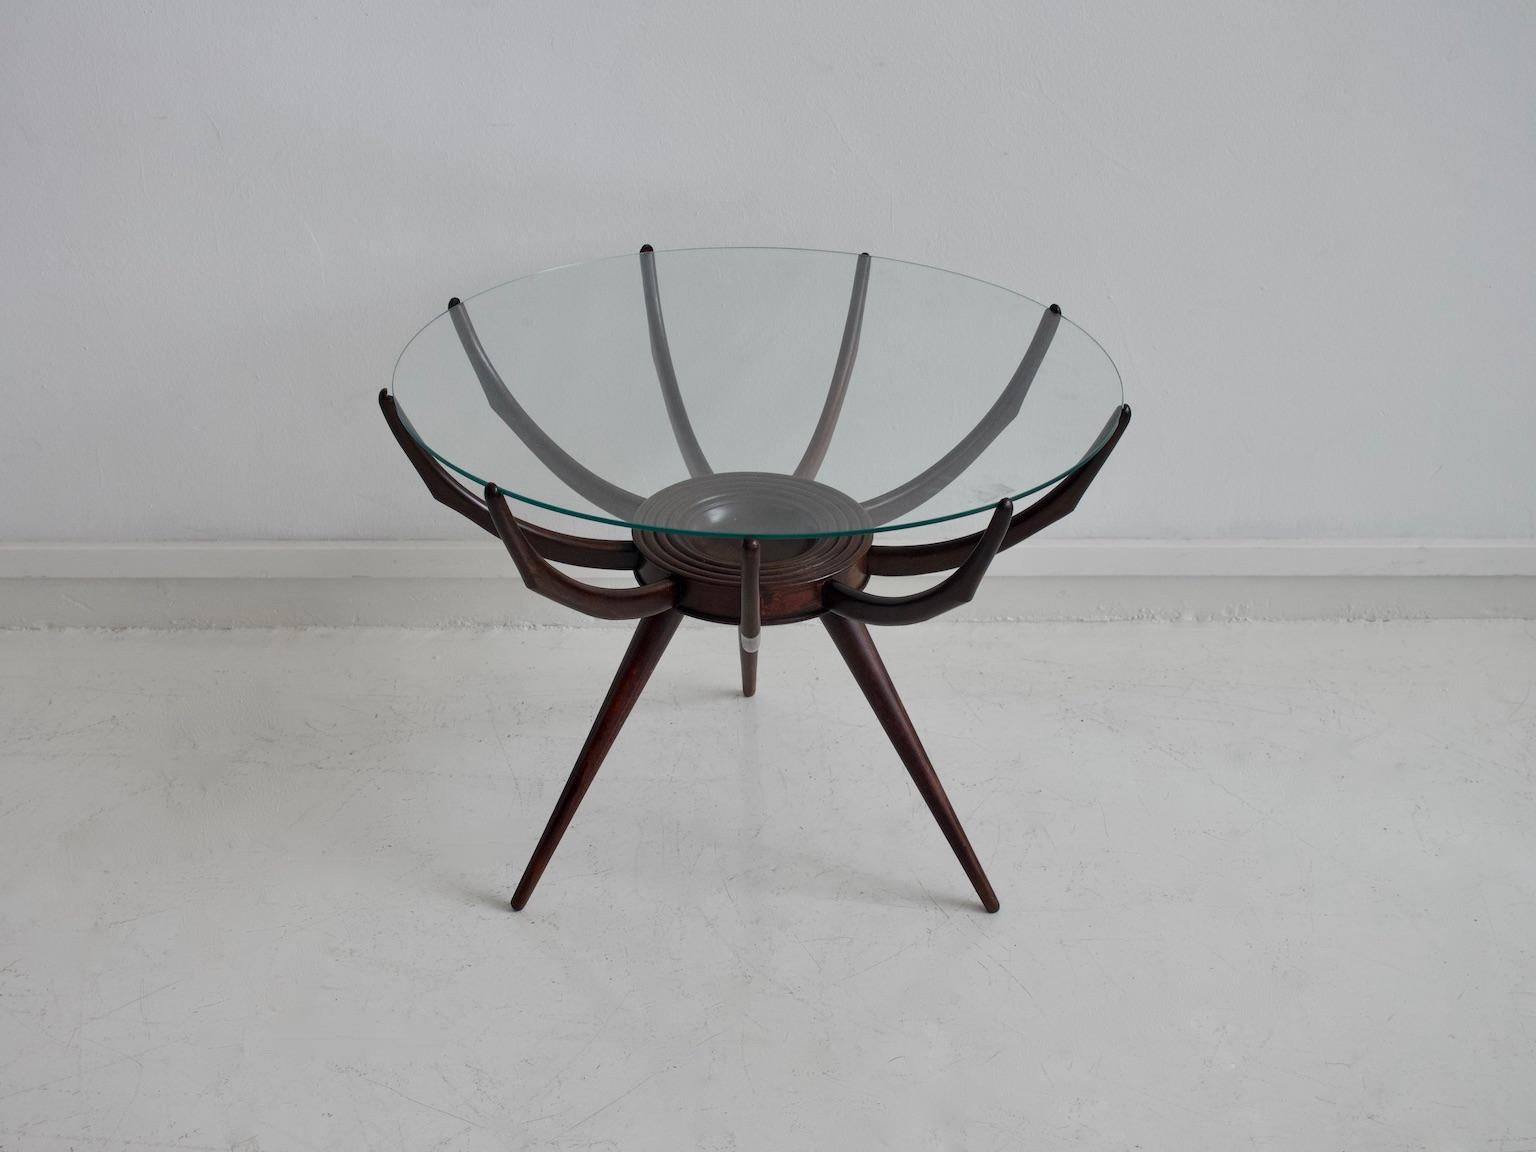 Coffee table with wooden base and round transparent glass top made in Italy. The form of the table is derived and adapted from a Carlo De Carli 1942 table design.